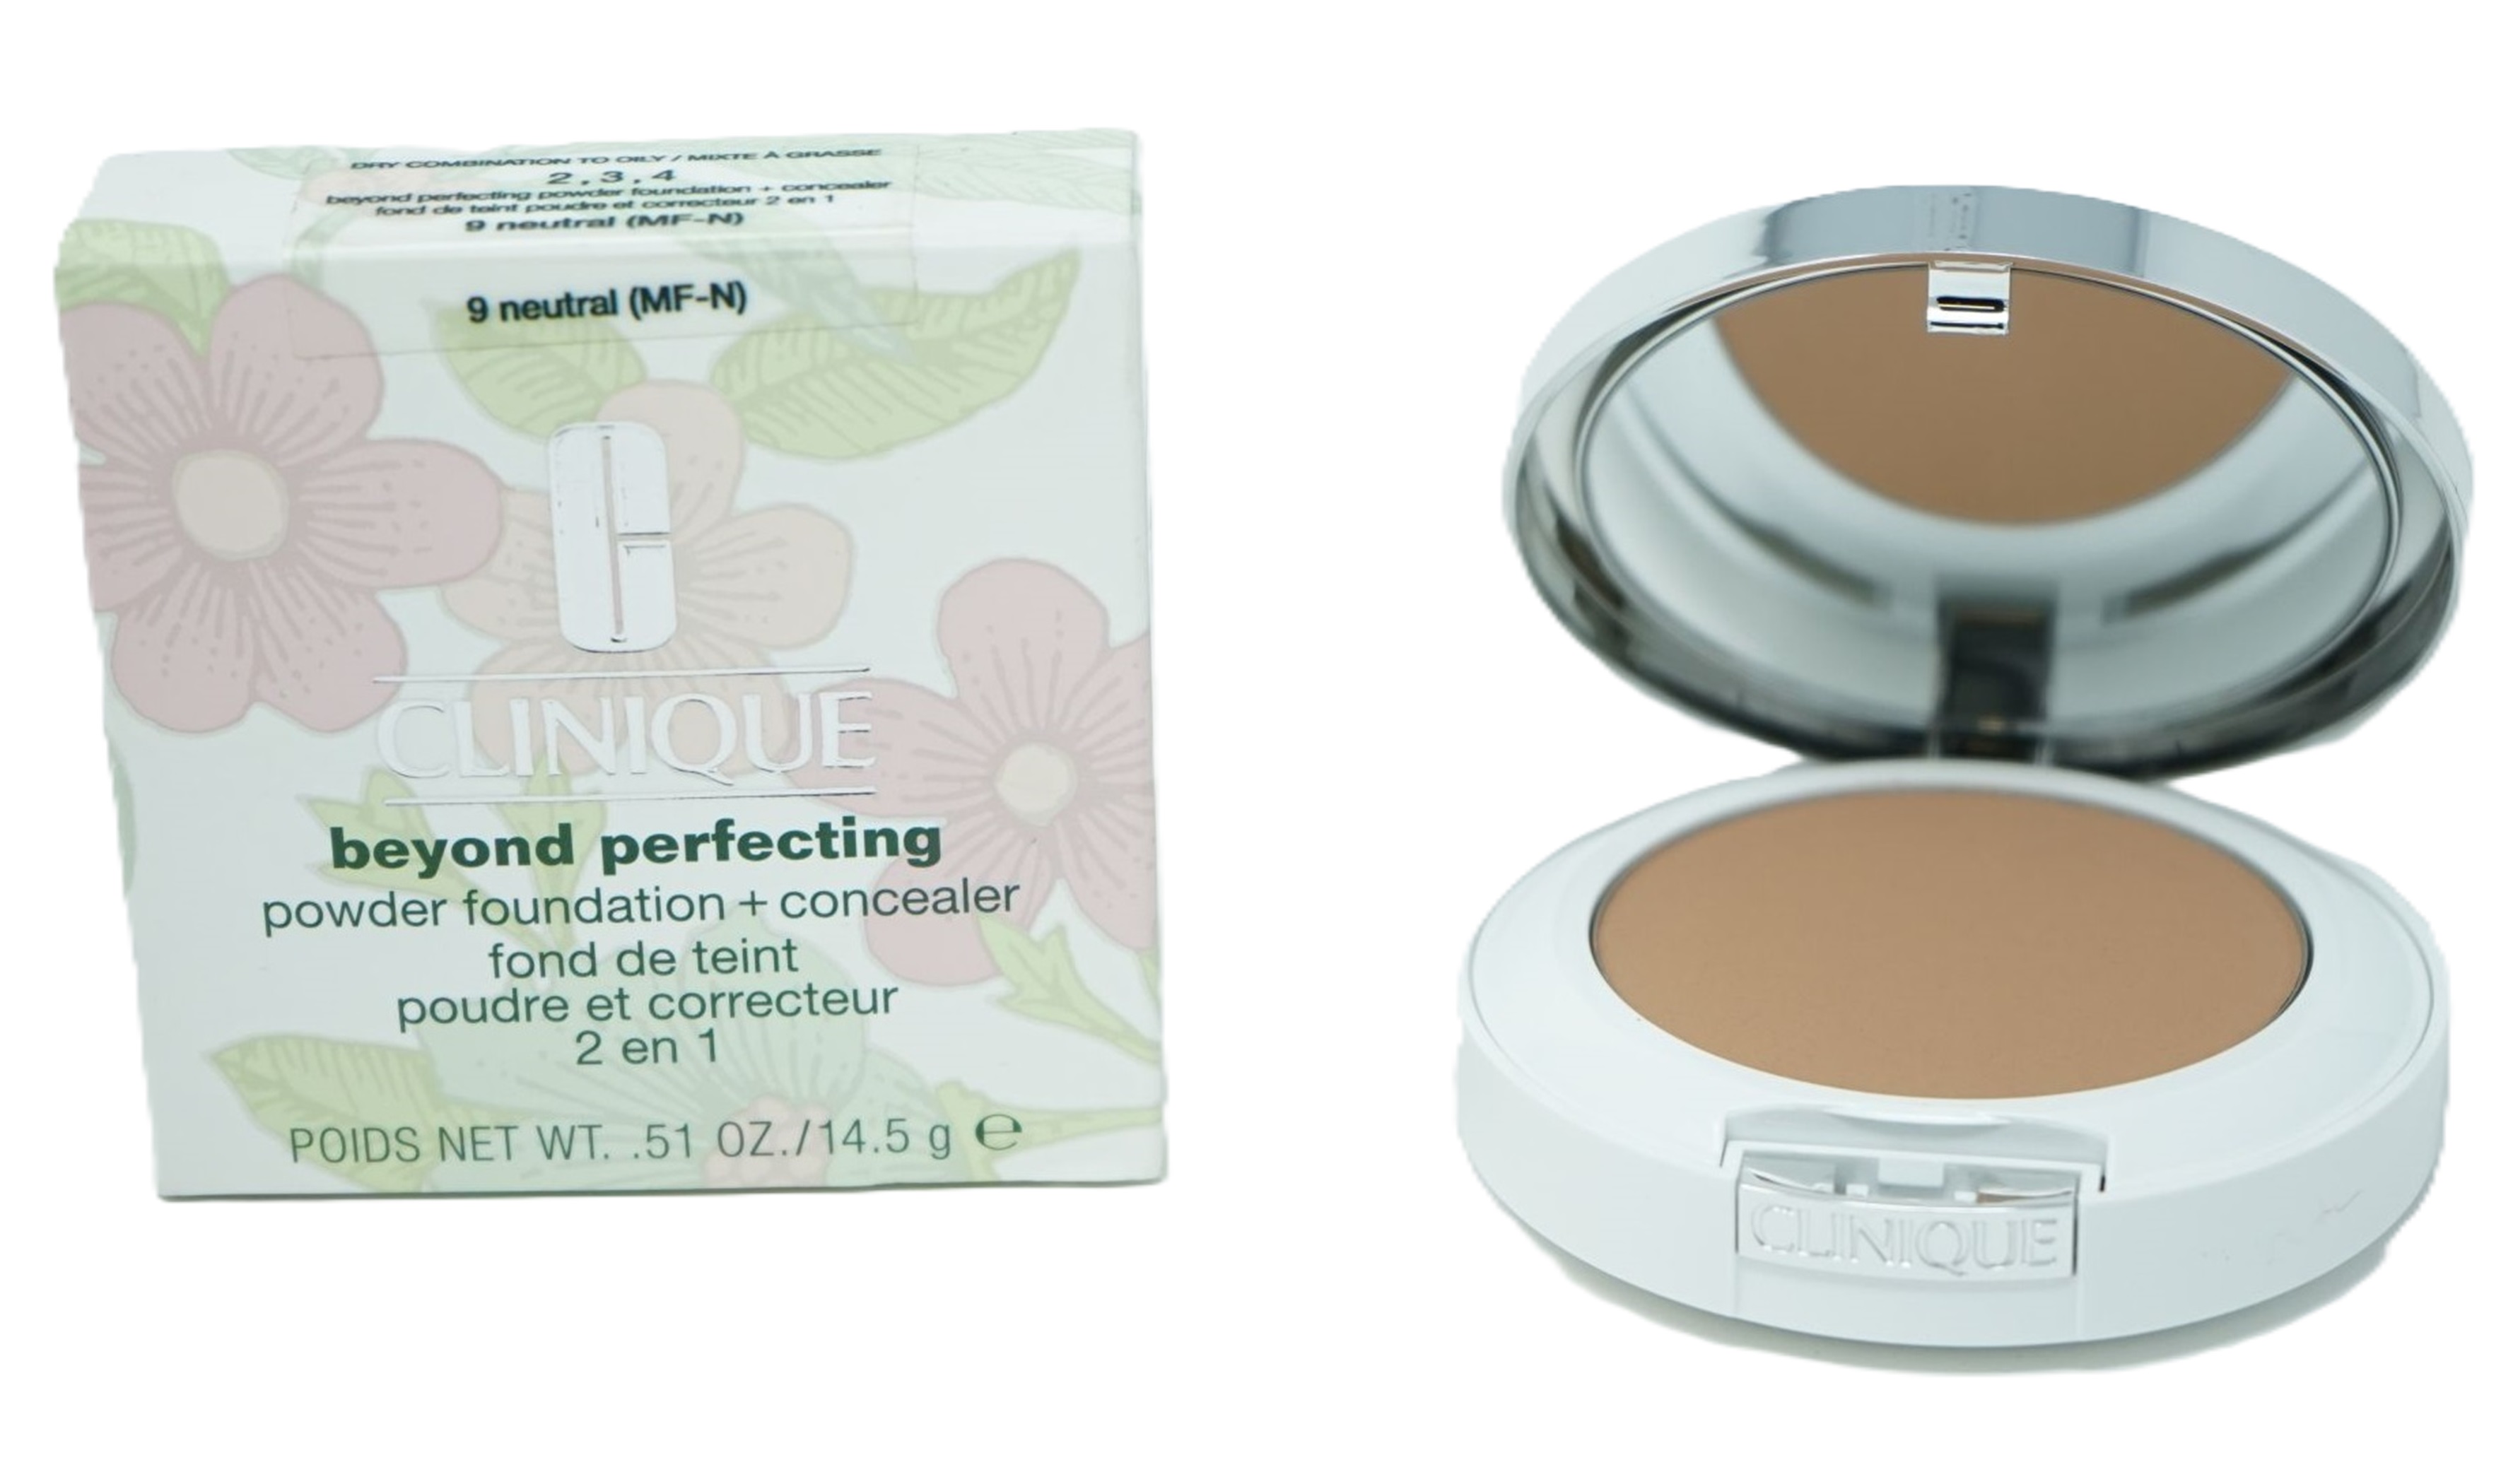 Clinique beyond perfecting powder foundation + concealer 9 neutral (MF-N)